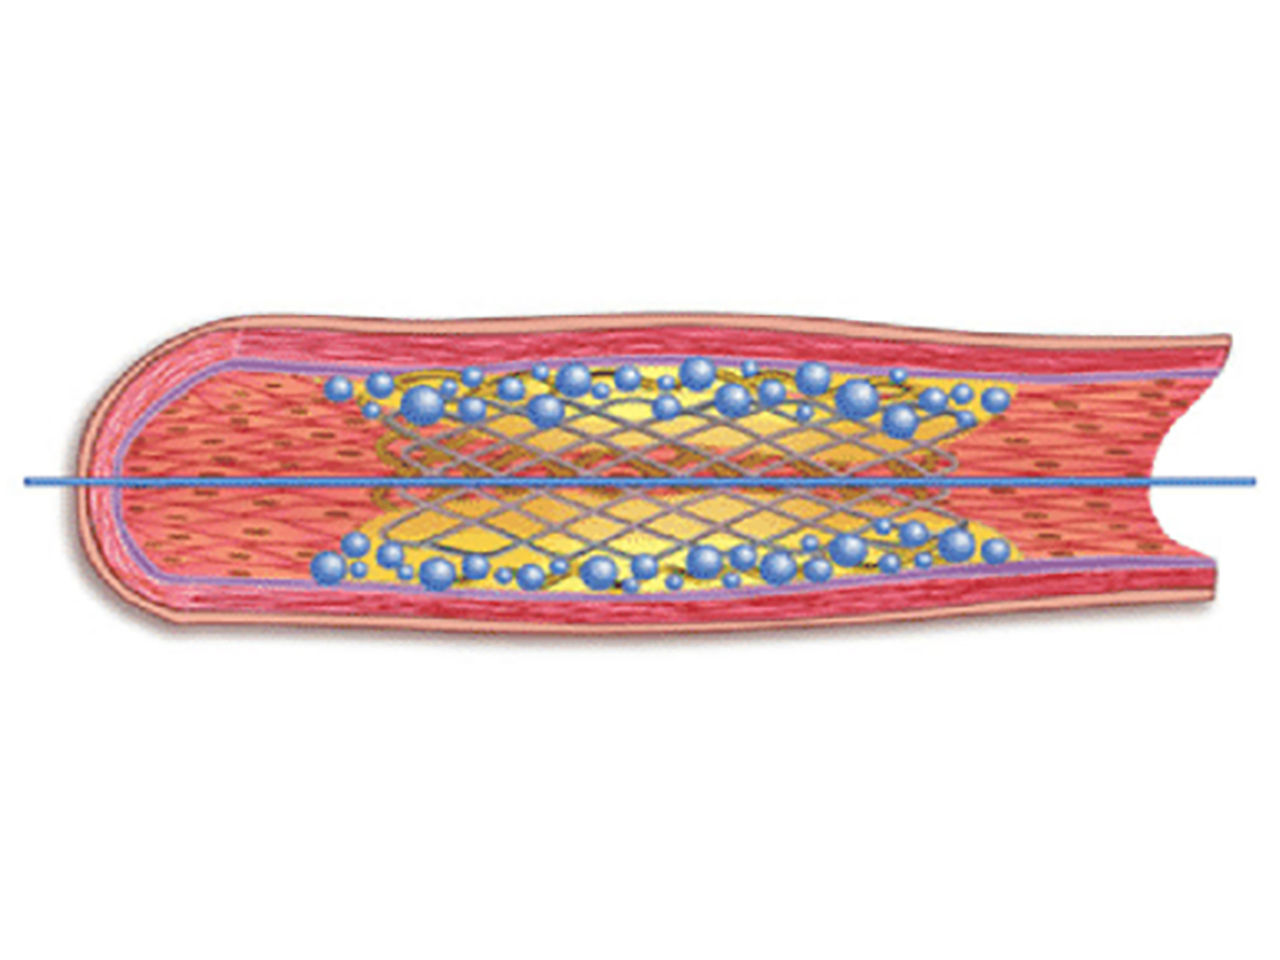 Polymer drug released from drug-eluting stent in the vessel to enable short DAPT.